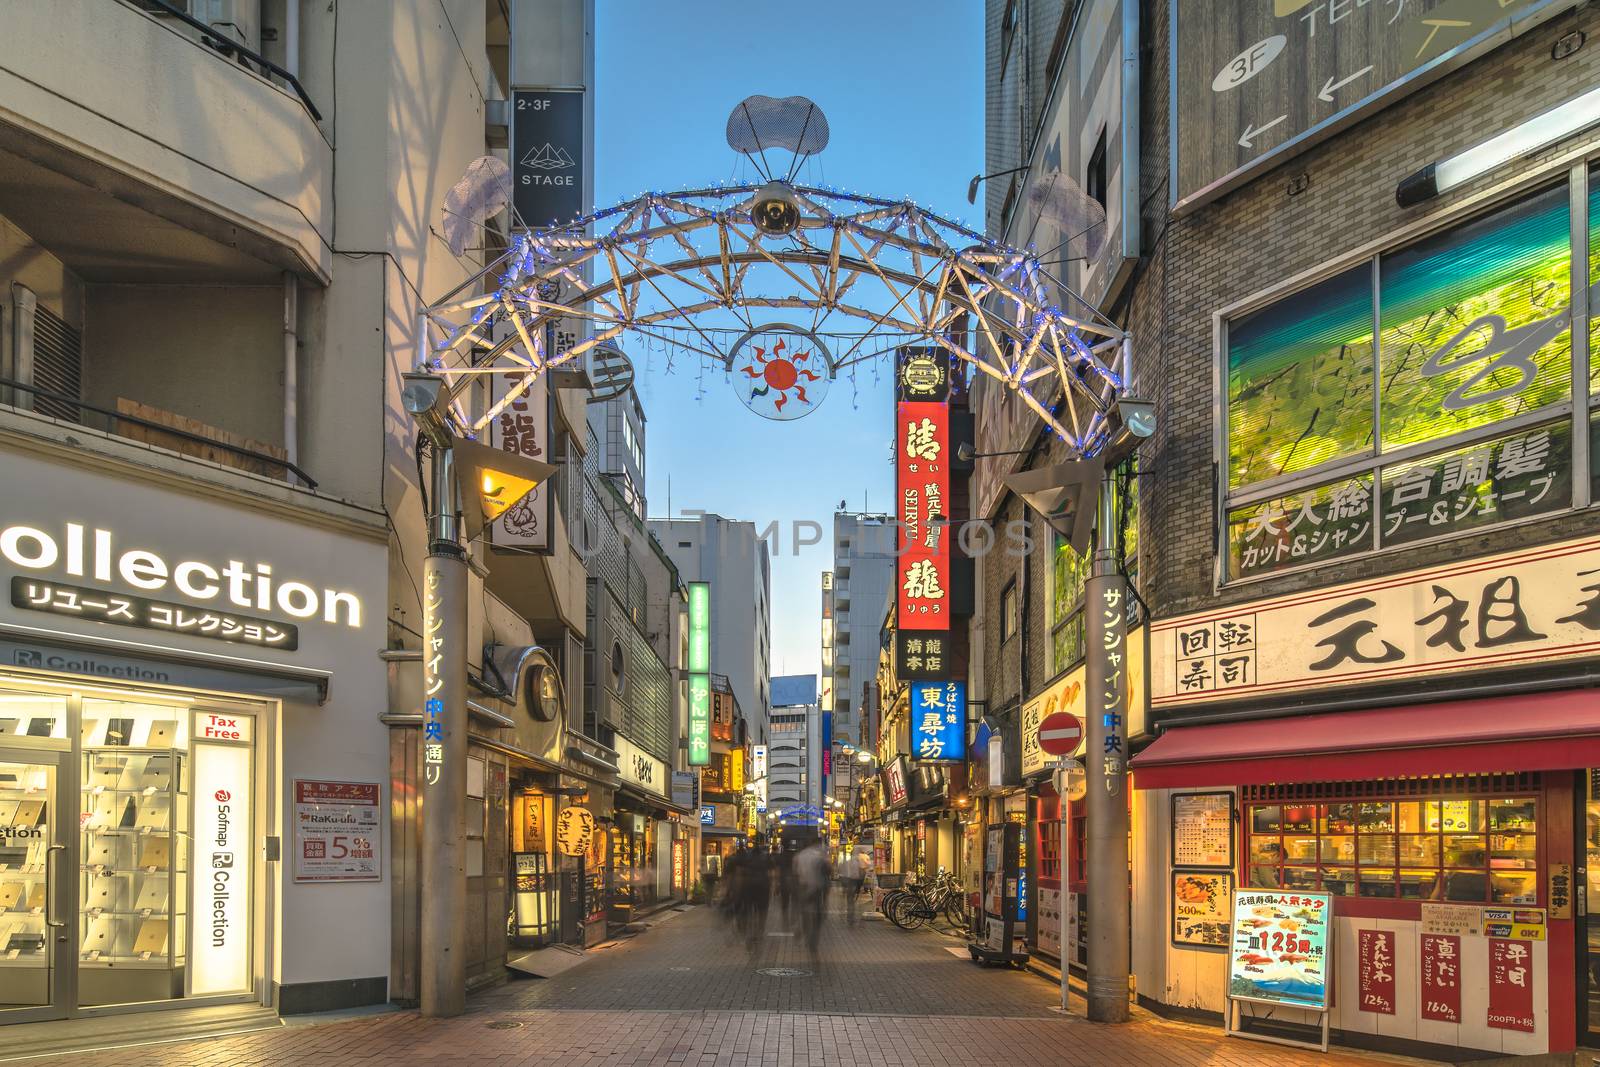 Illuminated entrance gate of the Sunshine Central Street connecting the east exit of Ikebukuro station lines with restaurants, shops, game center and cinemas leading to the famous otaku's town otome road.